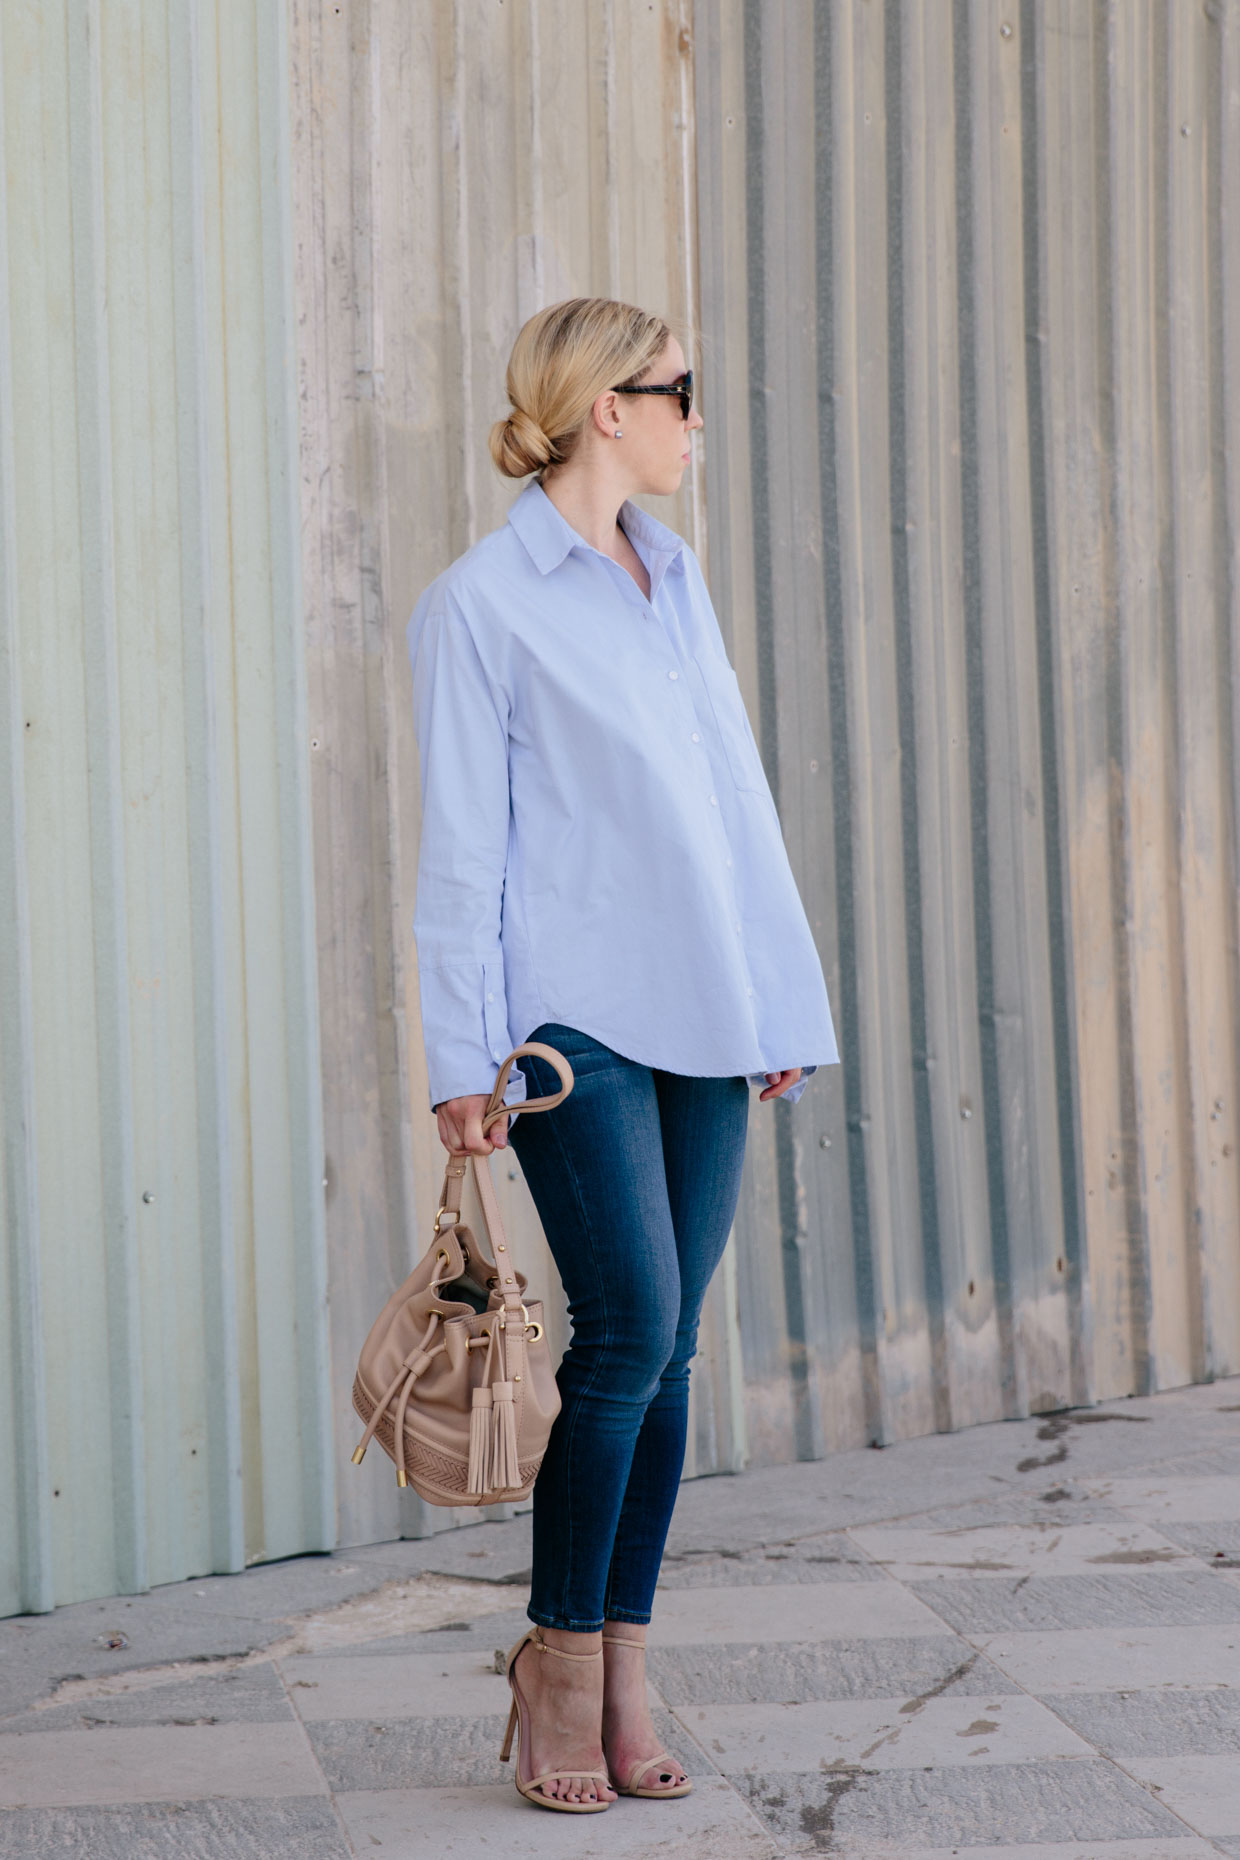 The Best Type of Non-Maternity Shirt to Wear During Pregnancy